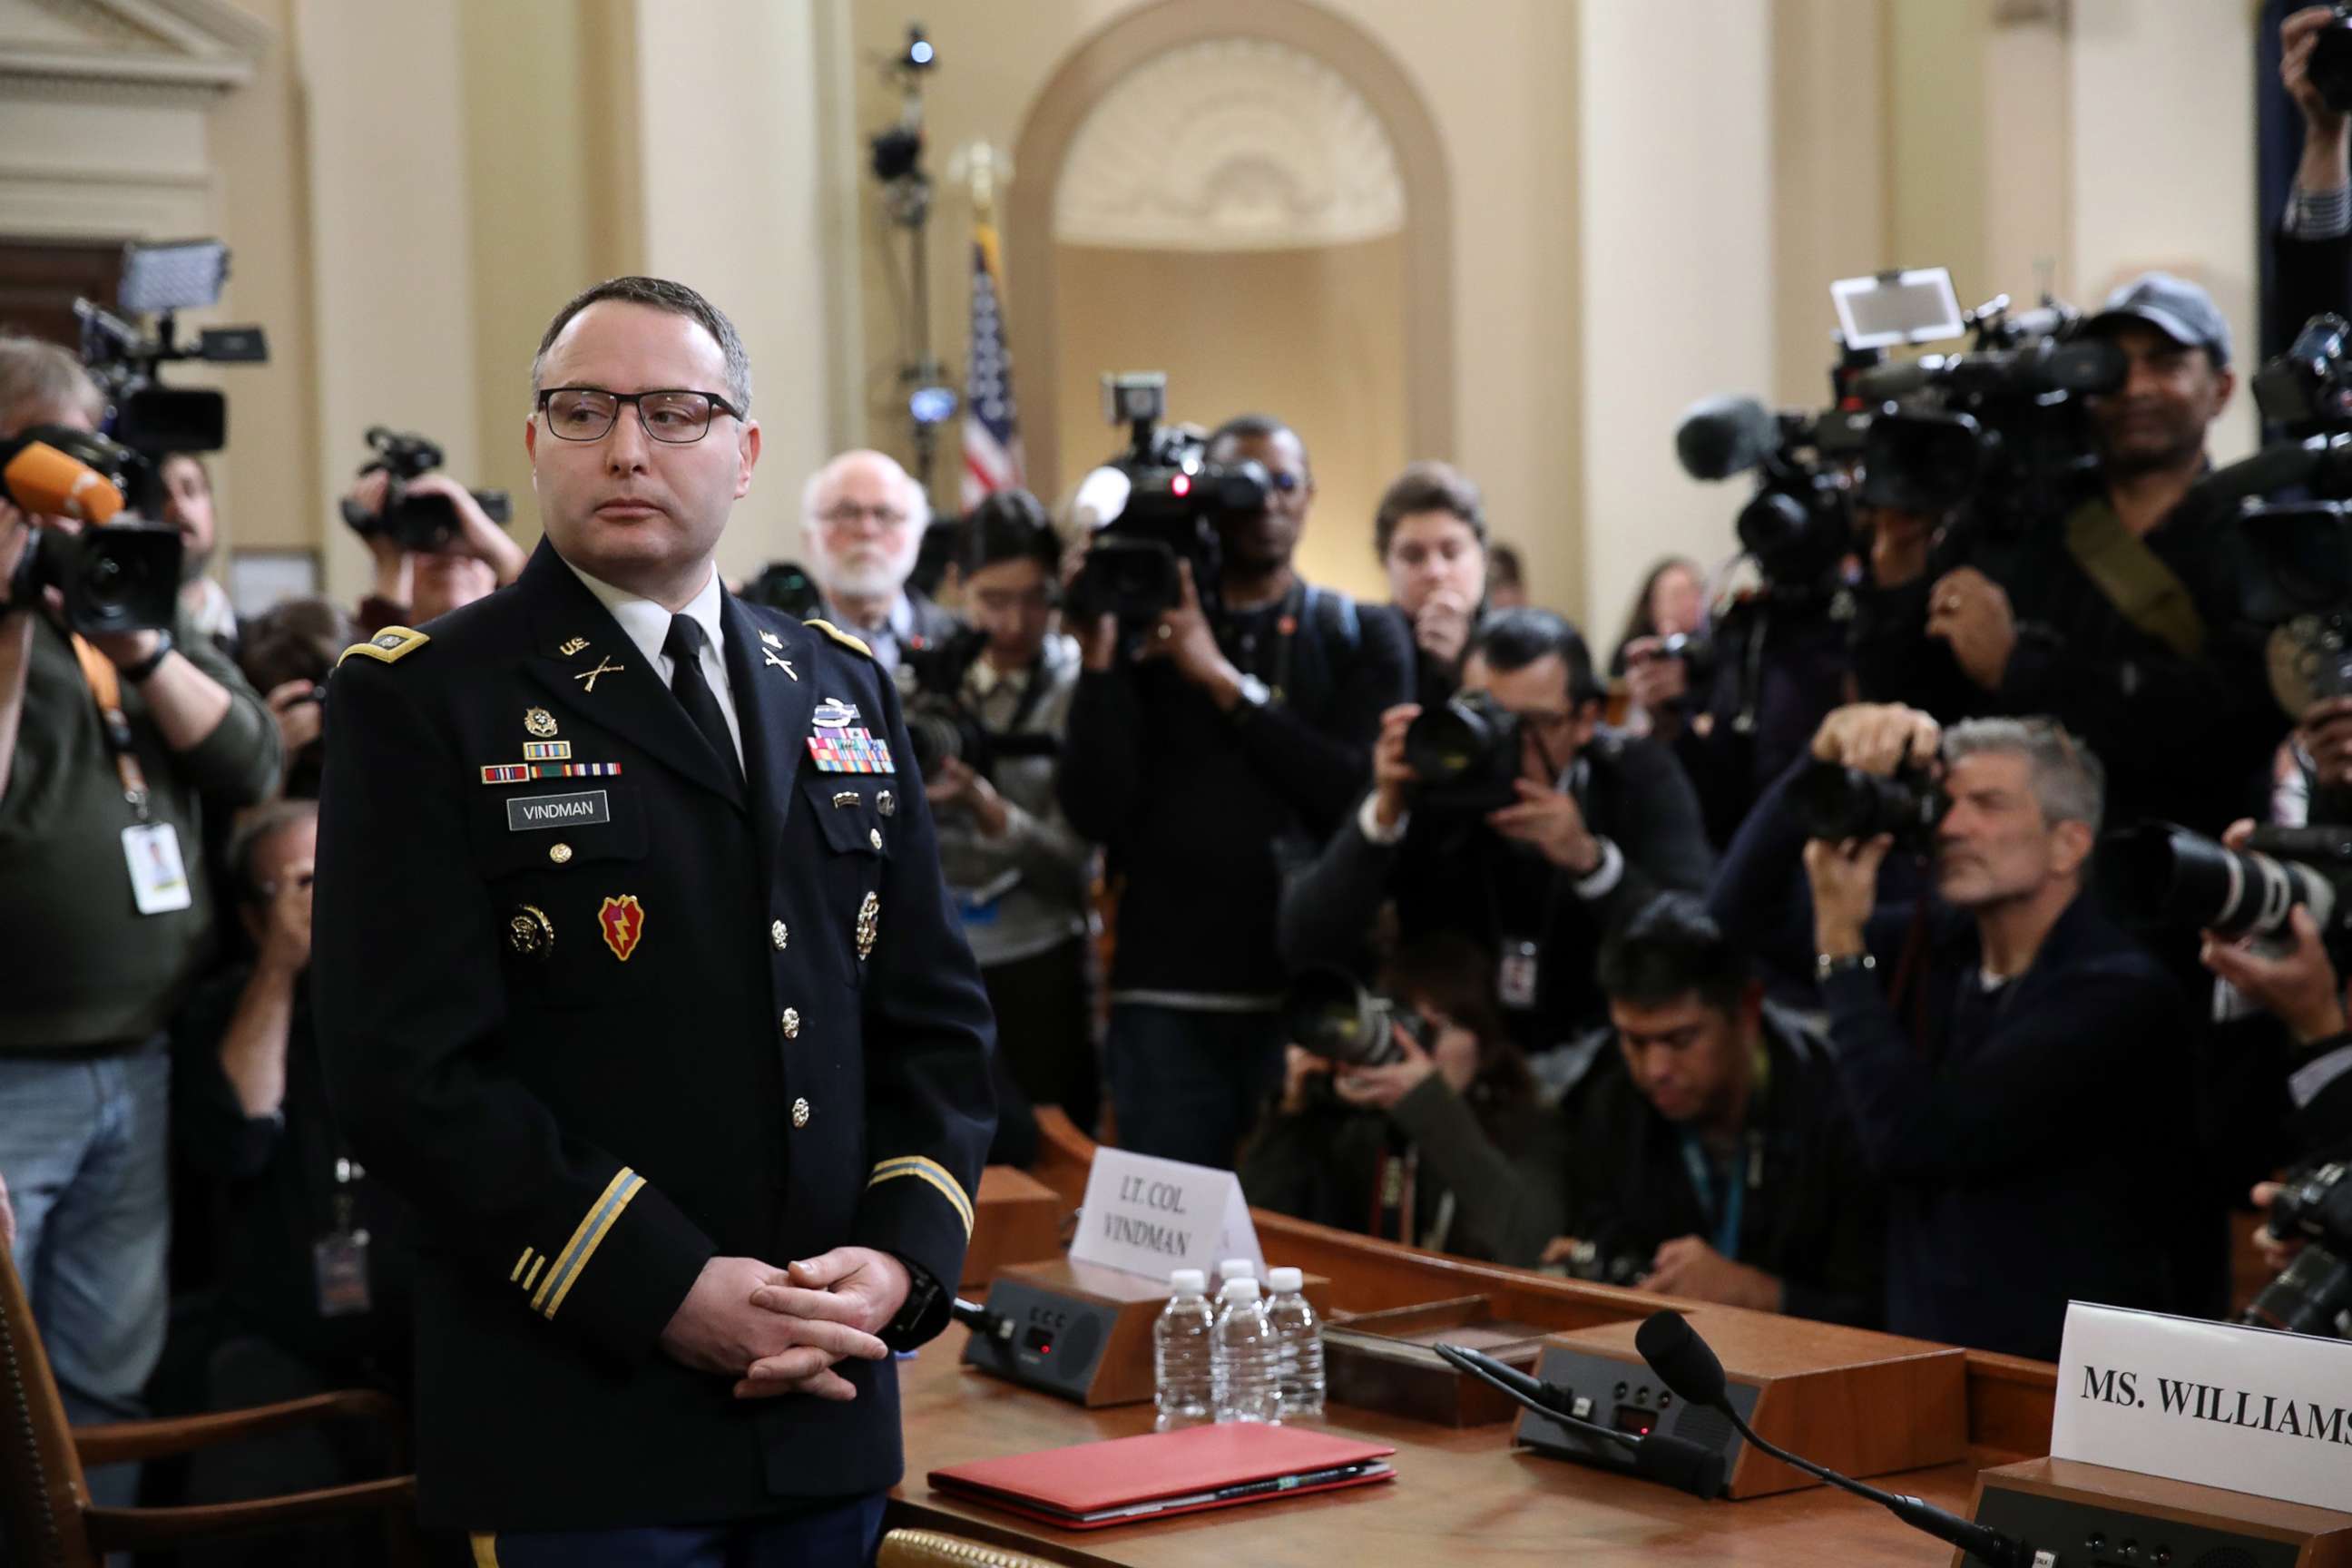 PHOTO: National Security Council Director for European Affairs Lt. Col. Alexander Vindman arrives to testify before the House Intelligence Committee in the Longworth House Office Building on Capitol Hill Nov. 19, 2019 in Washington, D.C.